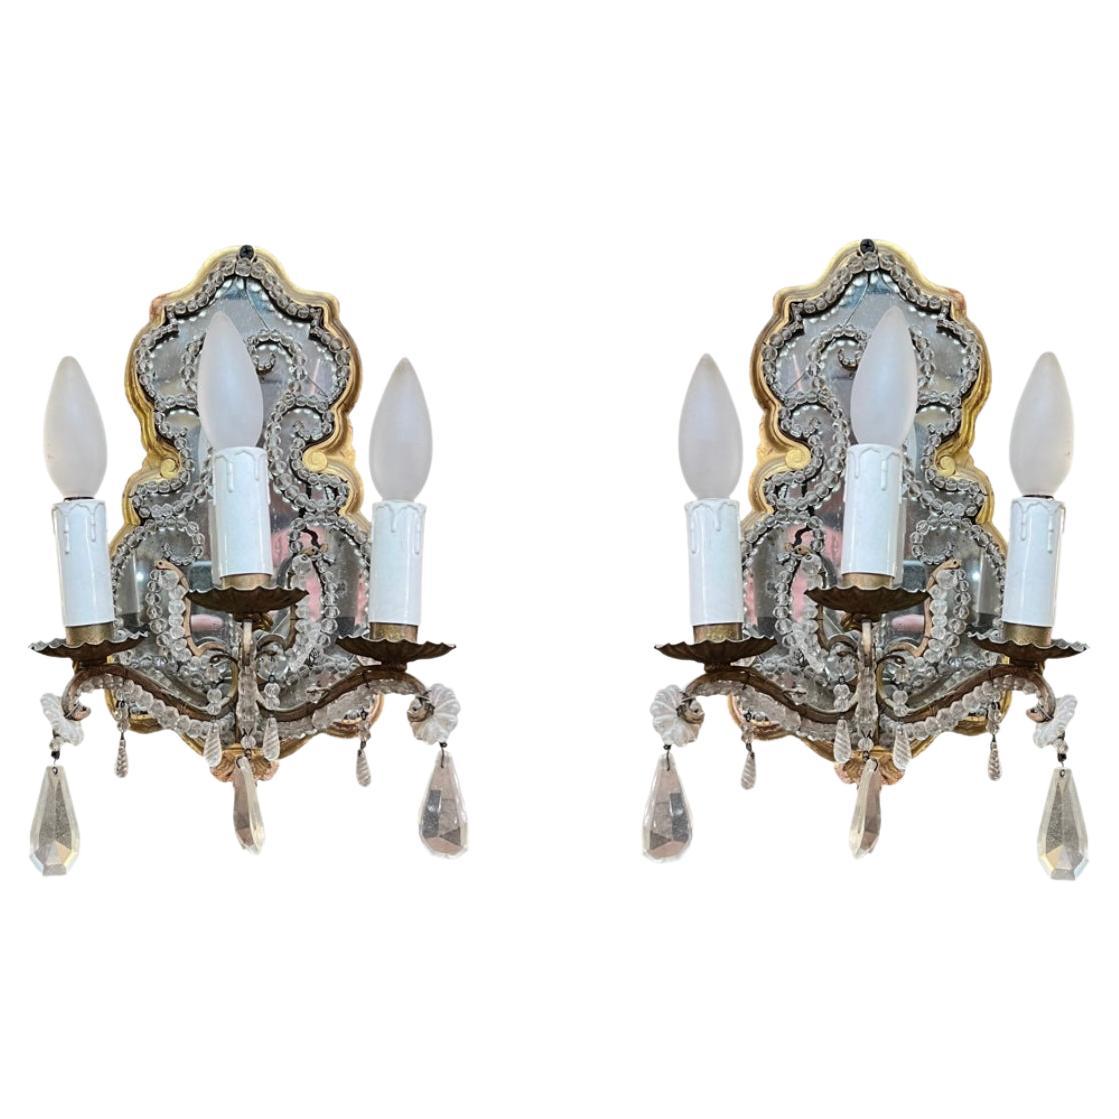 Pair 19th Century French Gilt Metal Mounted Mirrored Giltwood Sconces For Sale